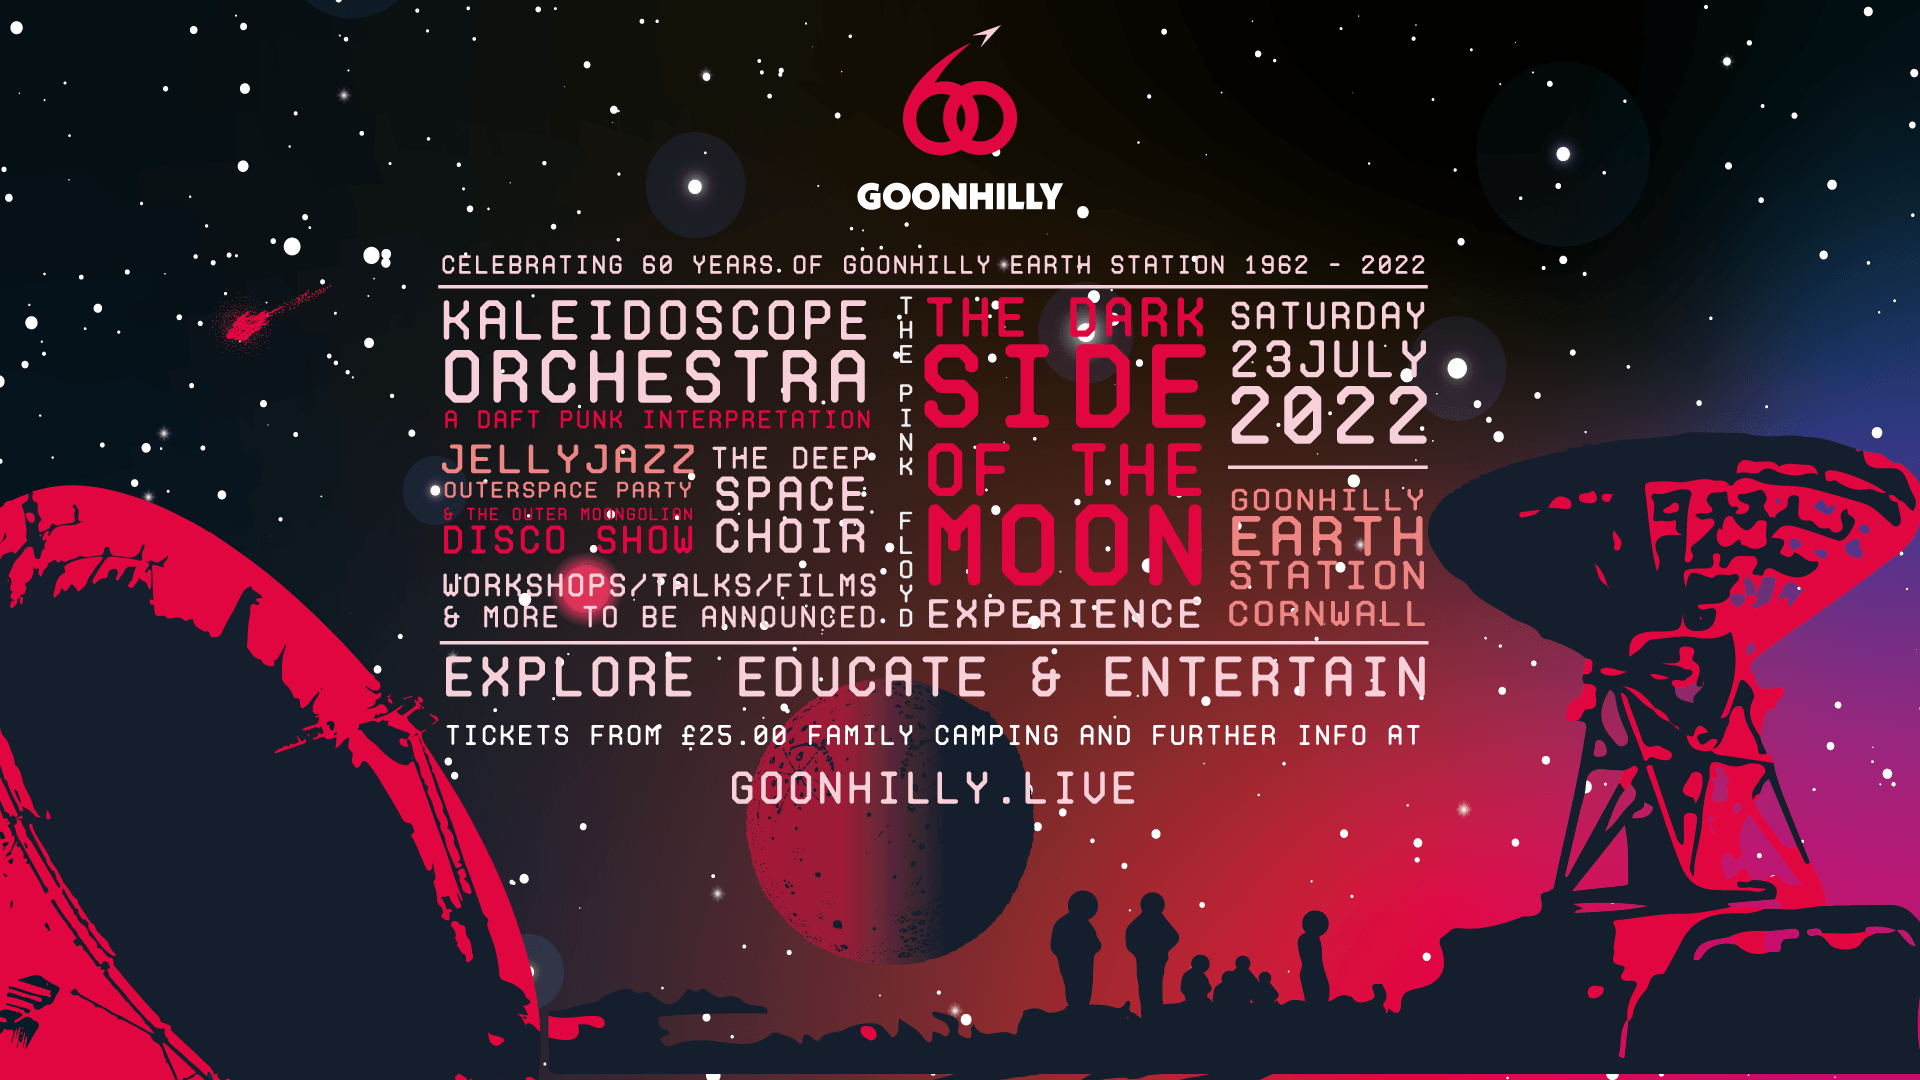 Goonhilly's 60th Celebrations poster